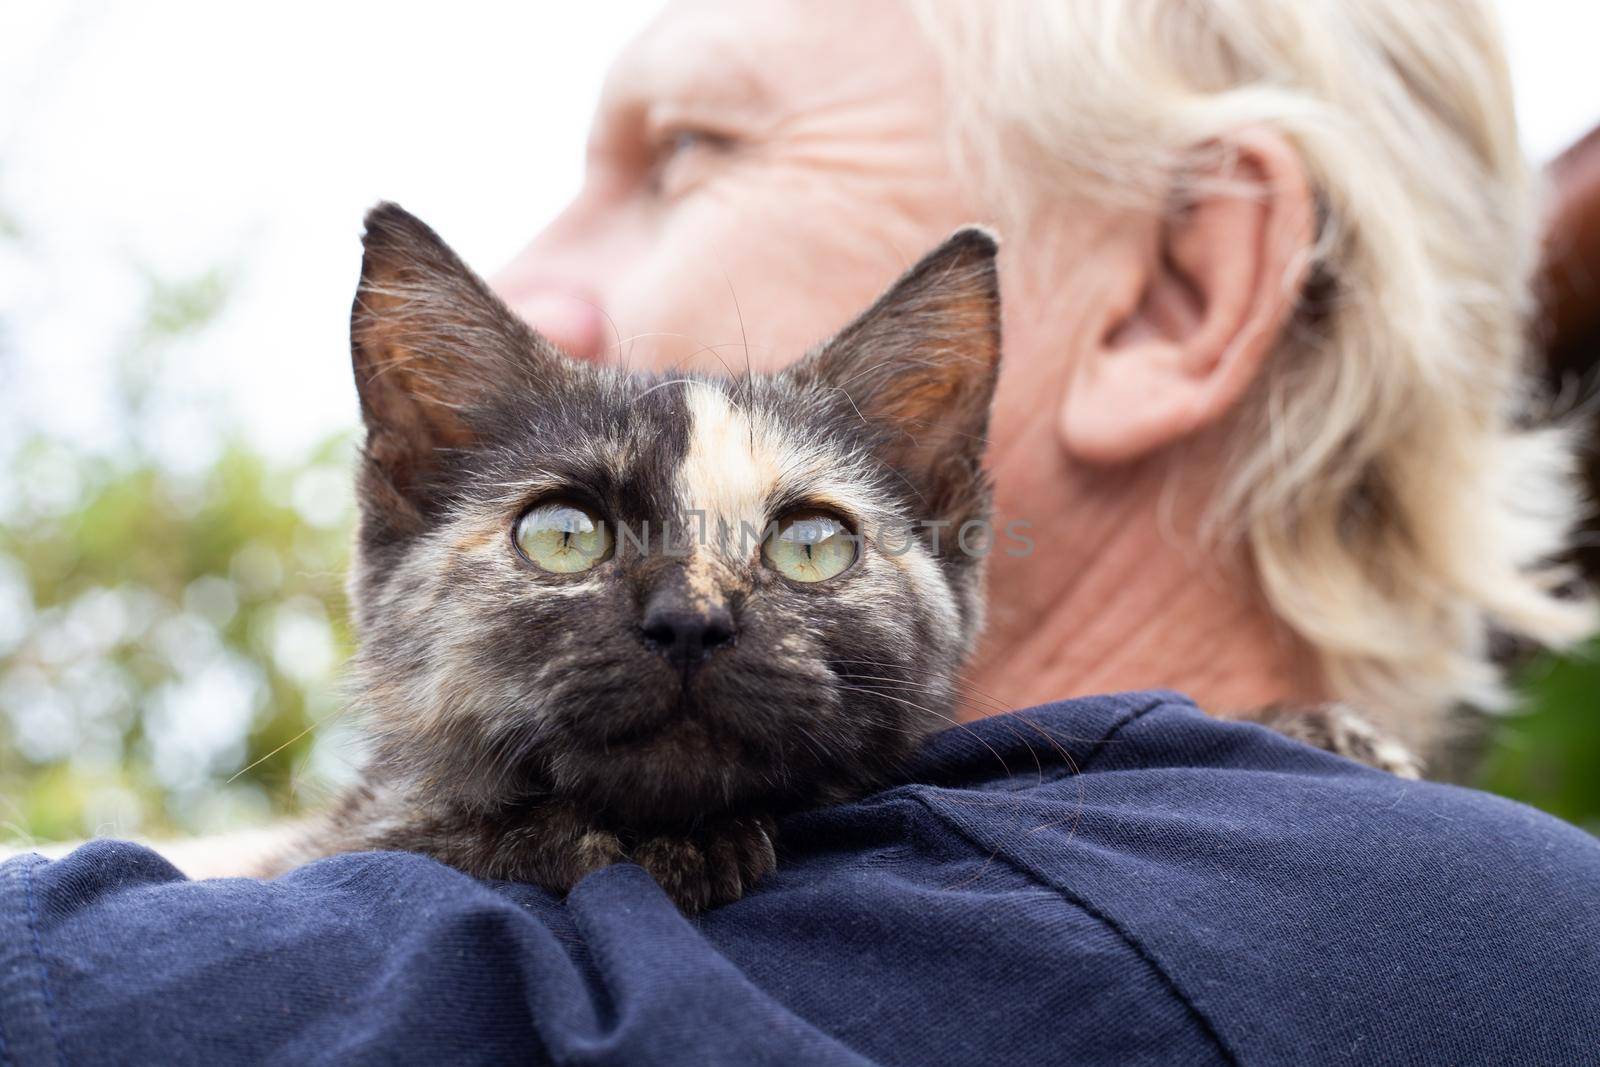 A kitten with a strip on the nose on the shoulder of an adult man. Love for pets.